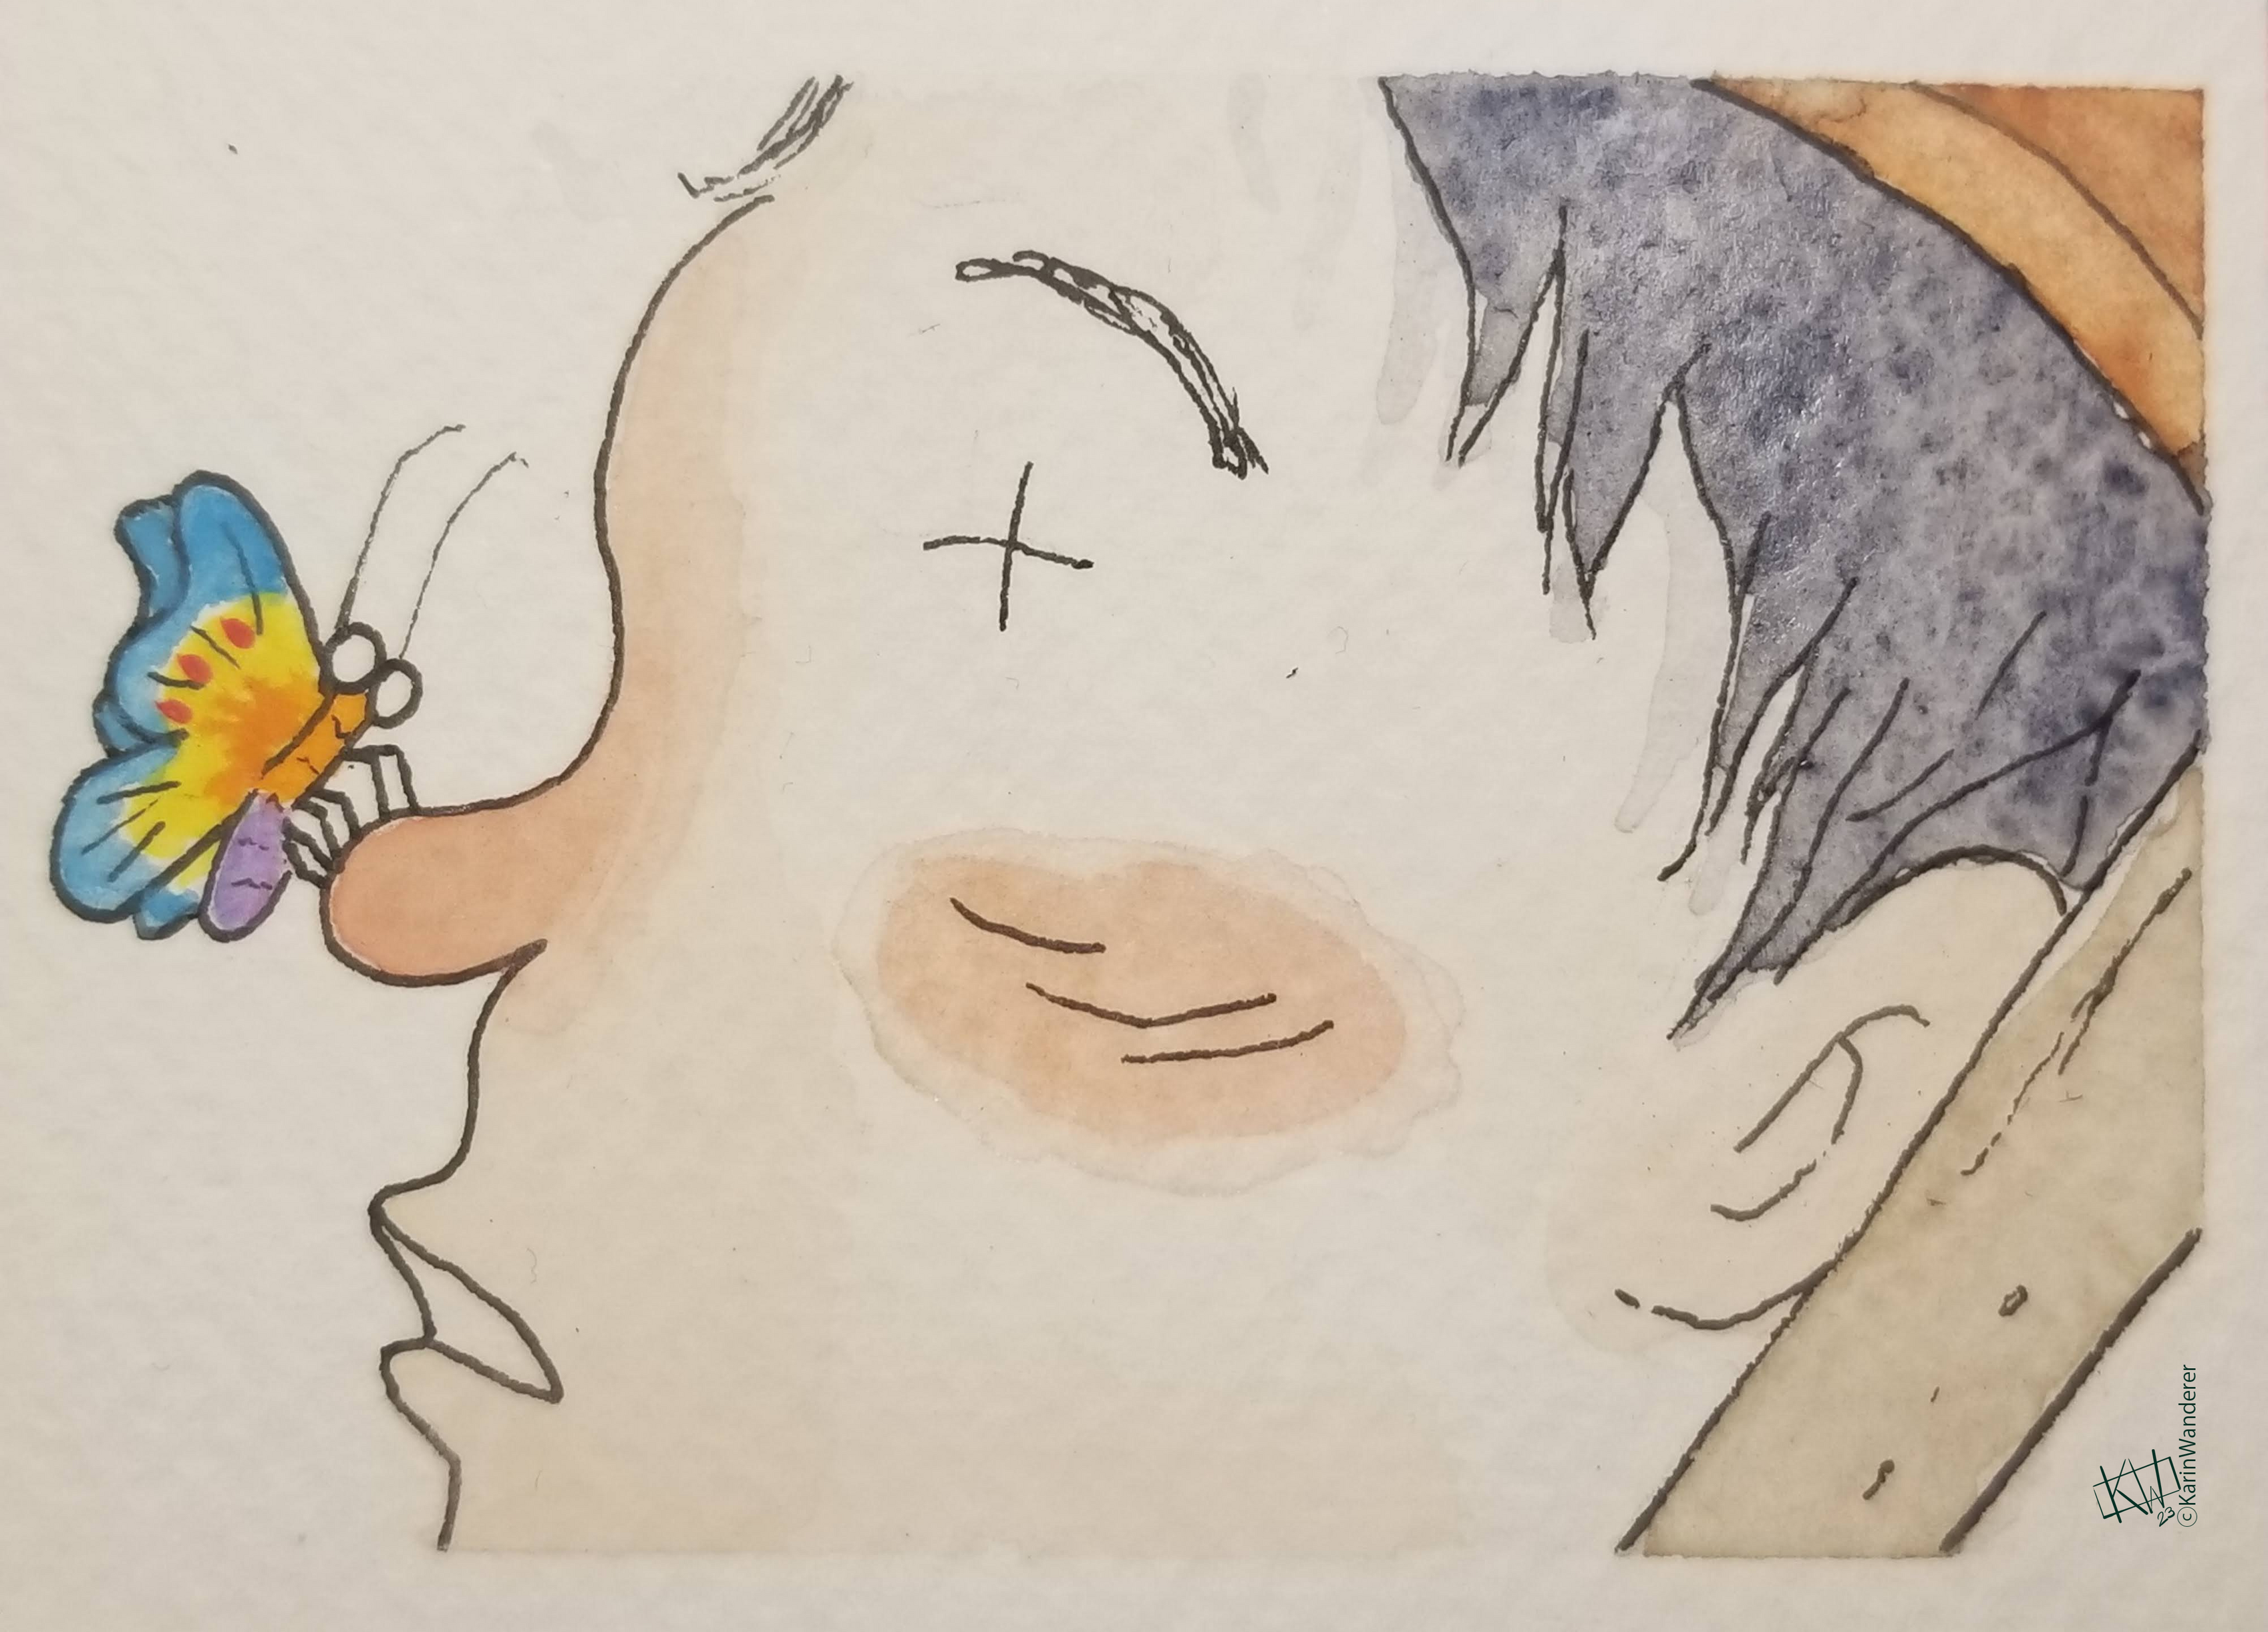 Watercolor of a sunburnt man with an orange-yellow-blue butterfly perched on his nose.